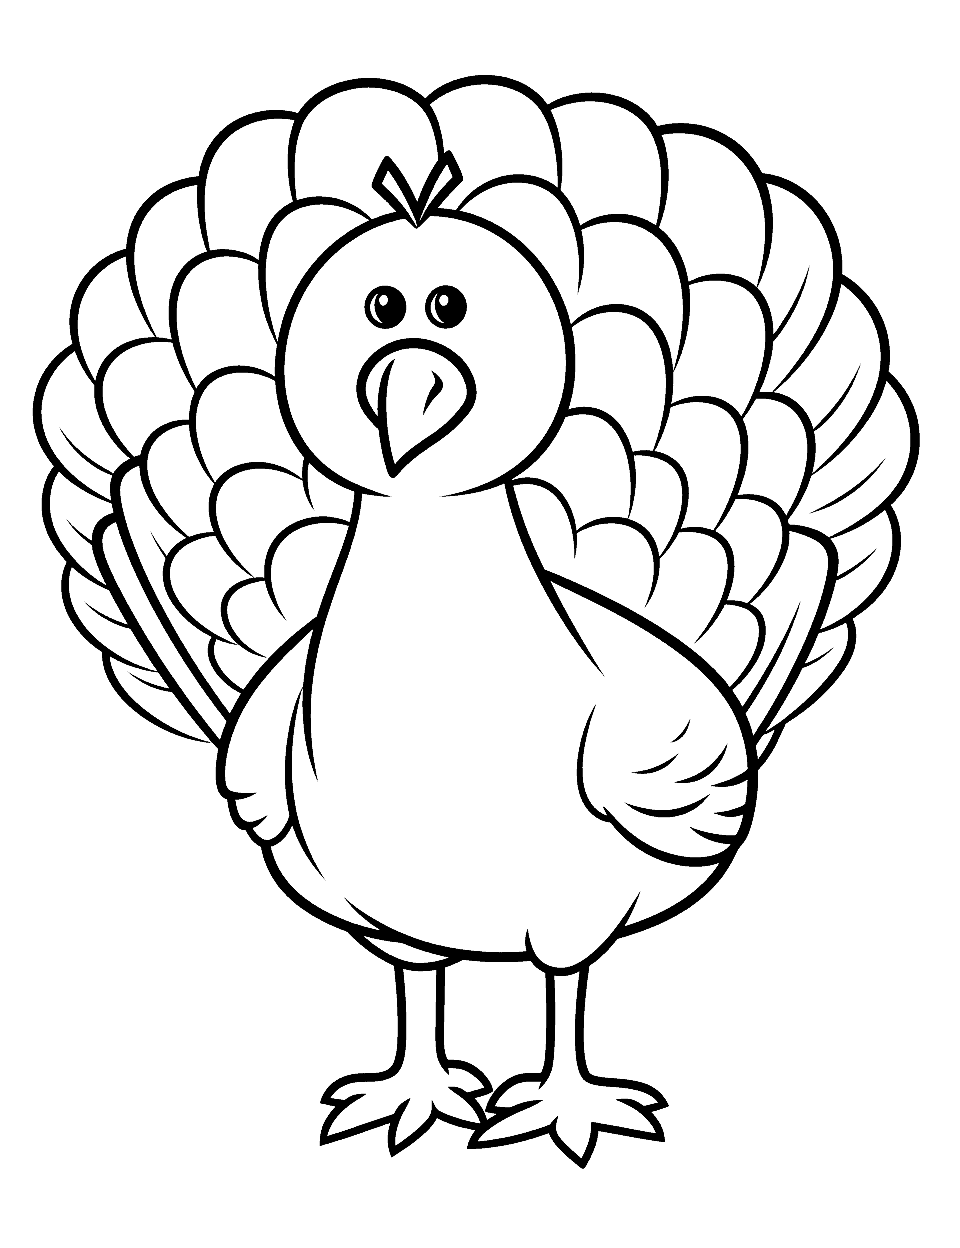 Simple Kindergarten Turkey Coloring Page - A simple, cute turkey outline perfect for kindergarten kids to fill in with color.